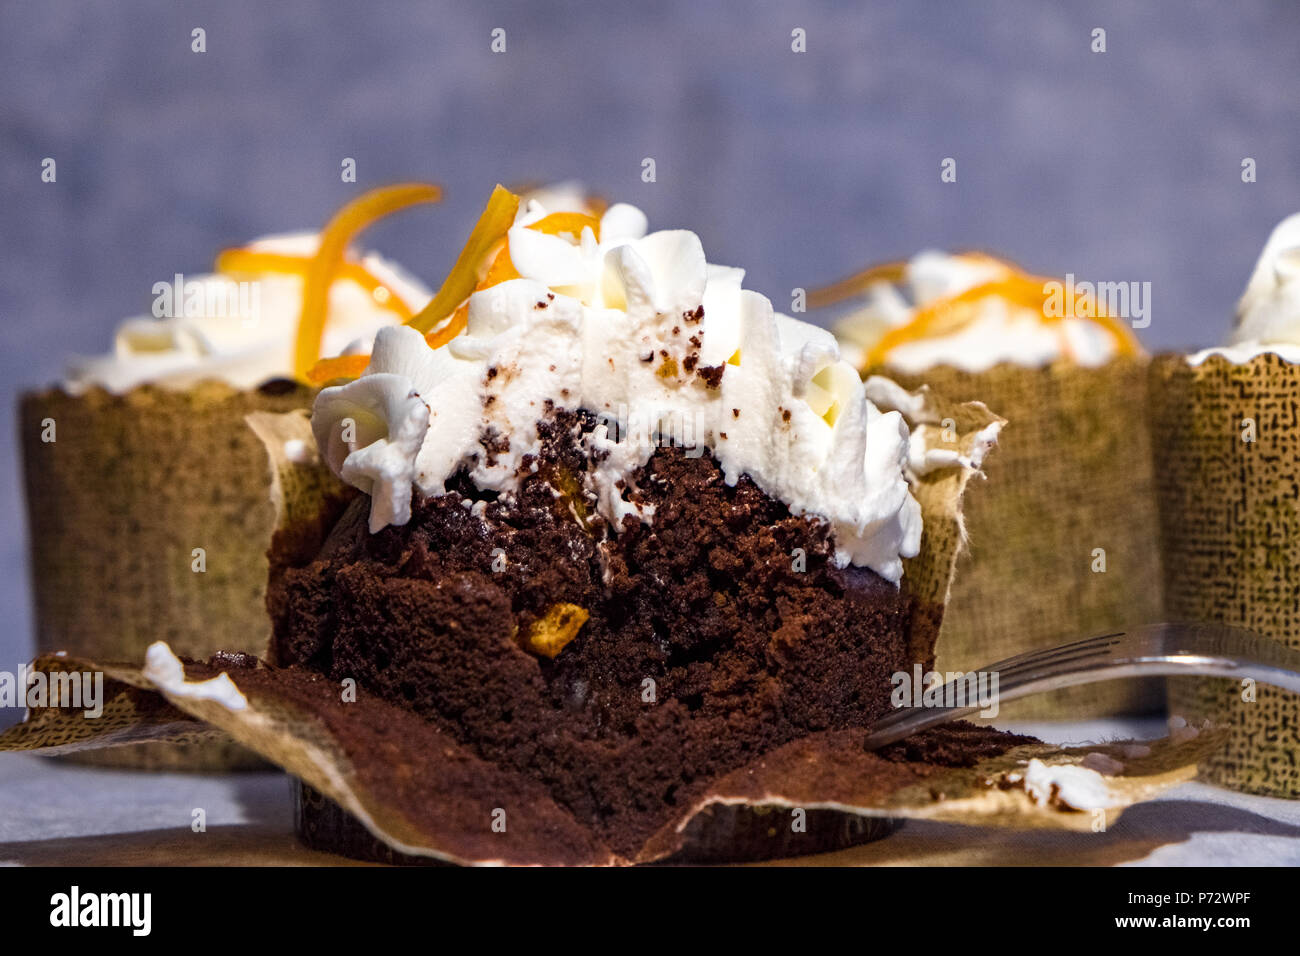 A Cross Section of an Individual Chocolate Cake with Candied Orange Peel and Whipped Cream Stock Photo